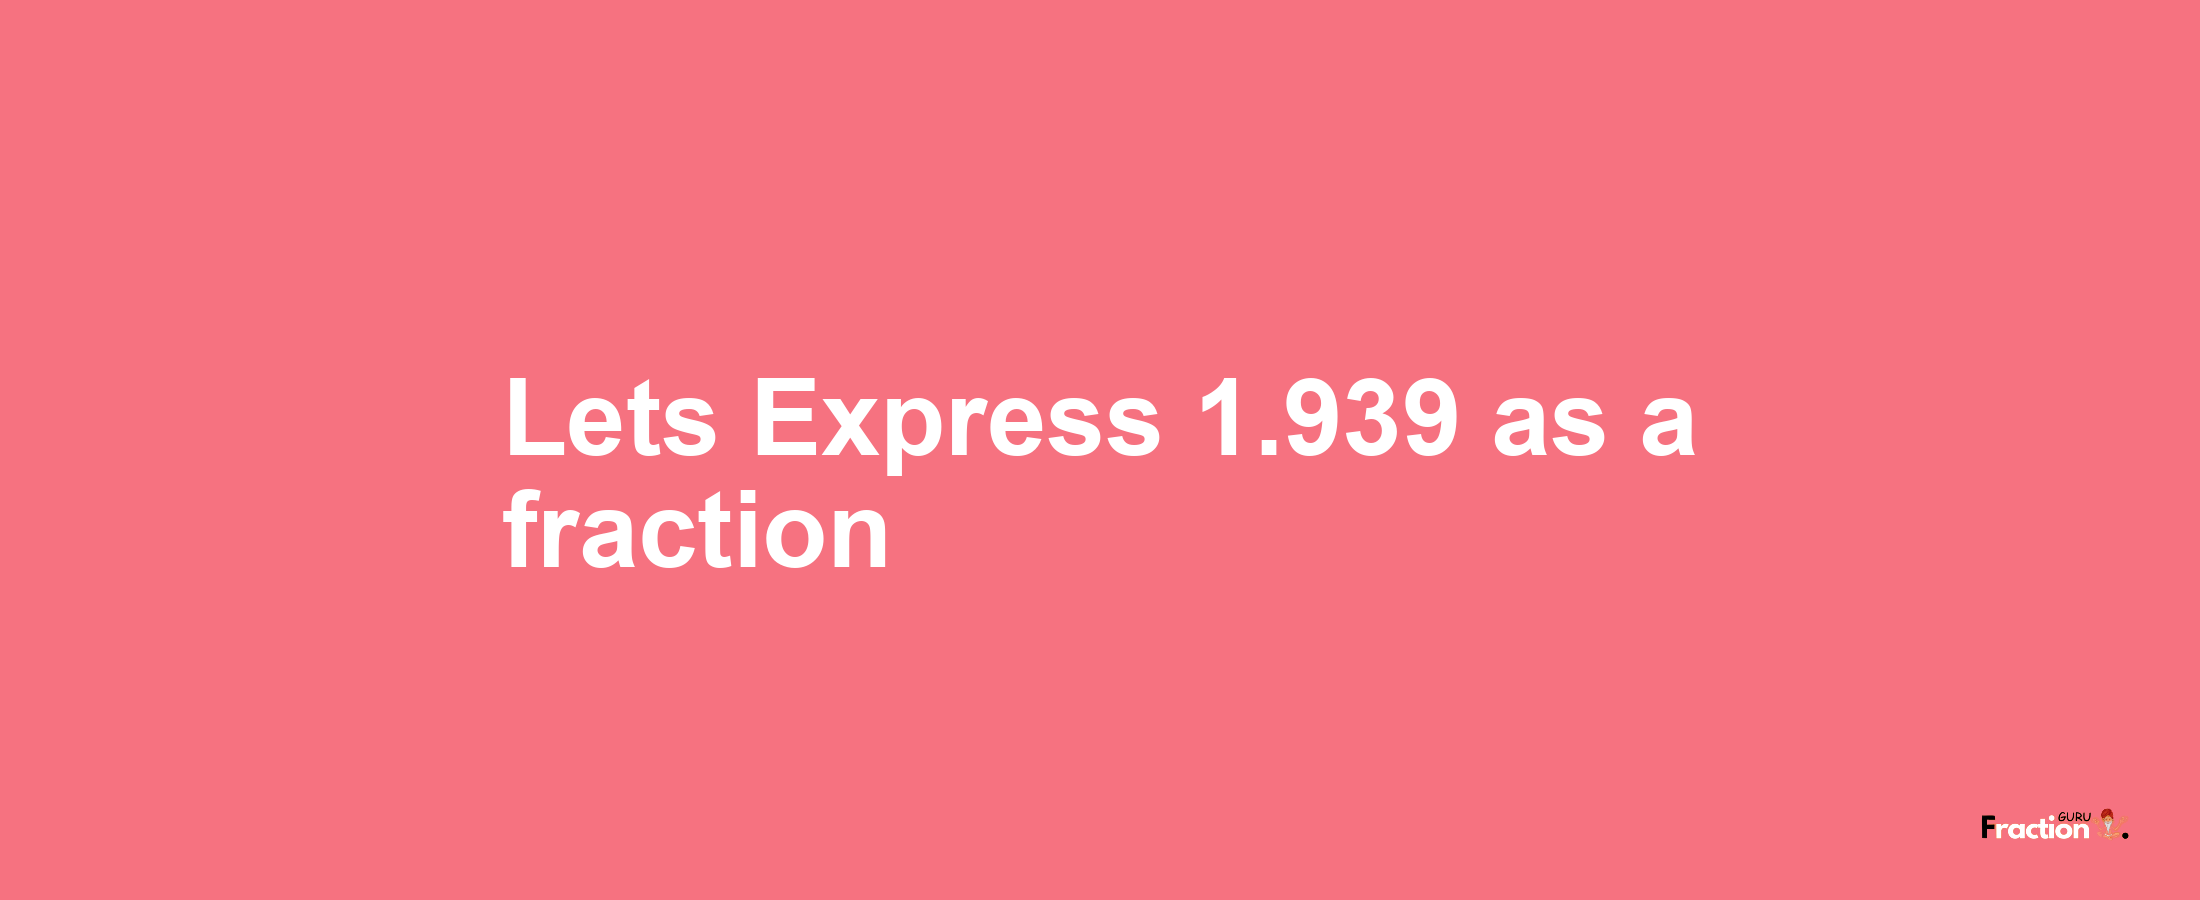 Lets Express 1.939 as afraction